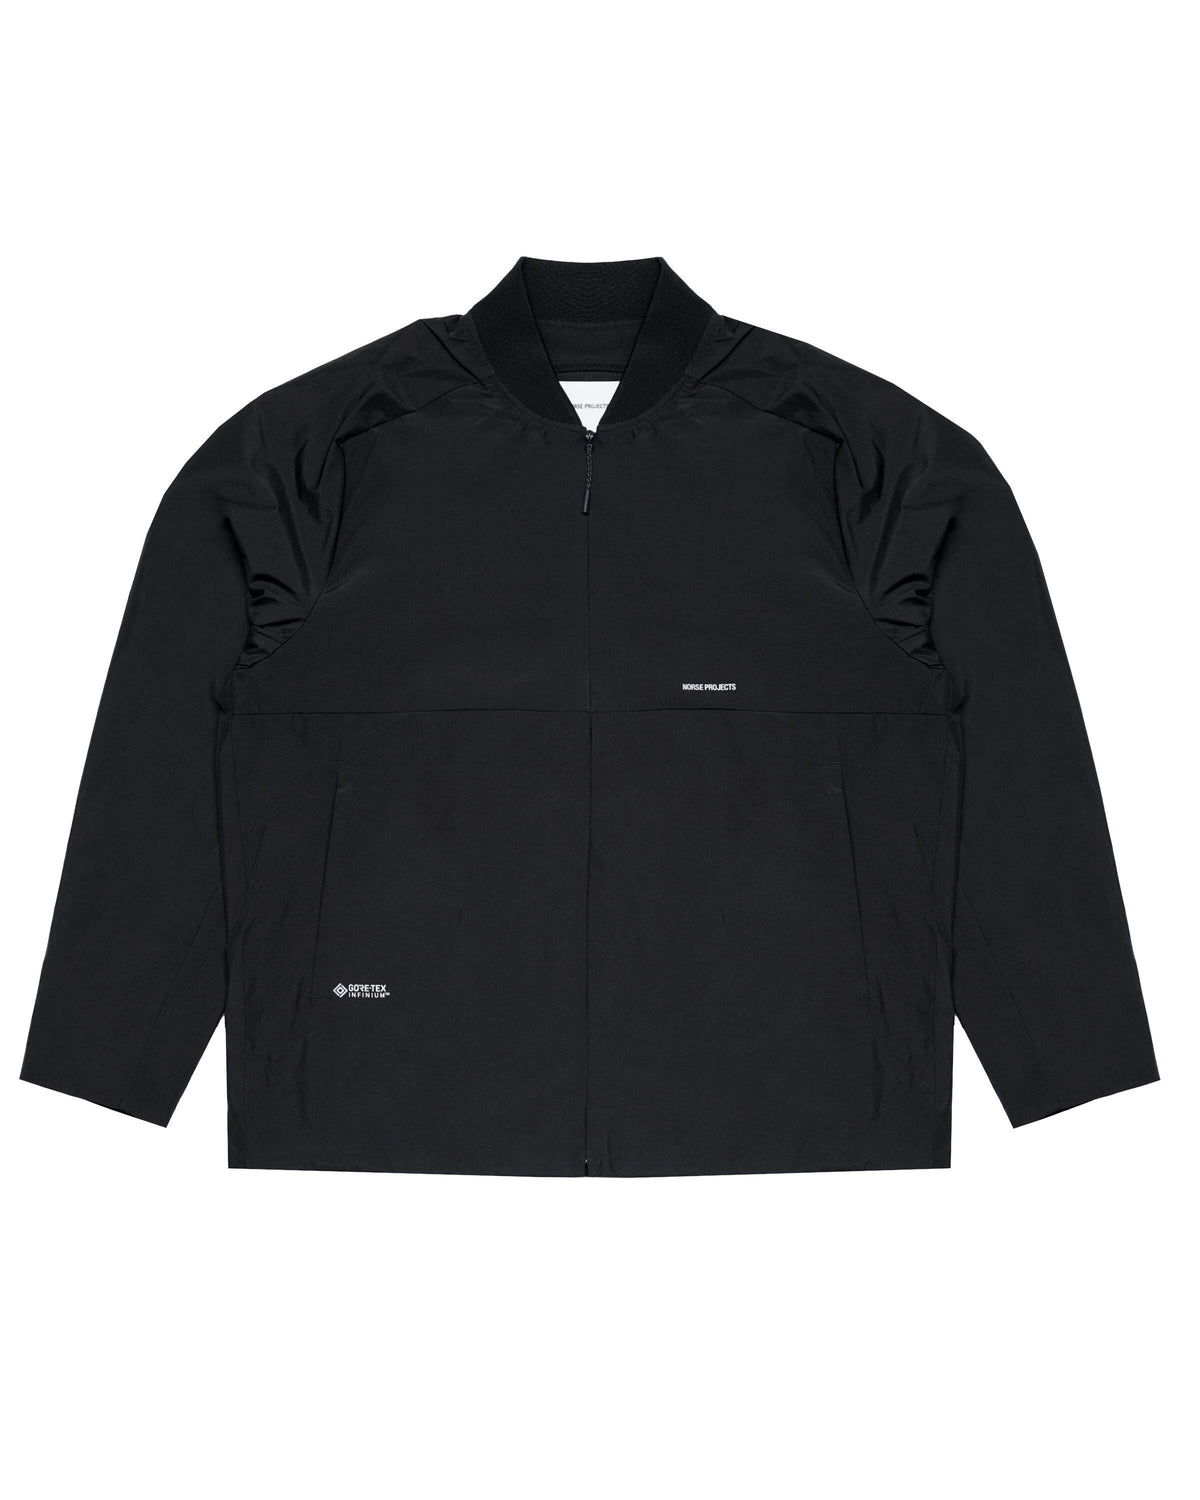 Norse Projects Ryan Gore-Tex Infinium Bomber Jacket